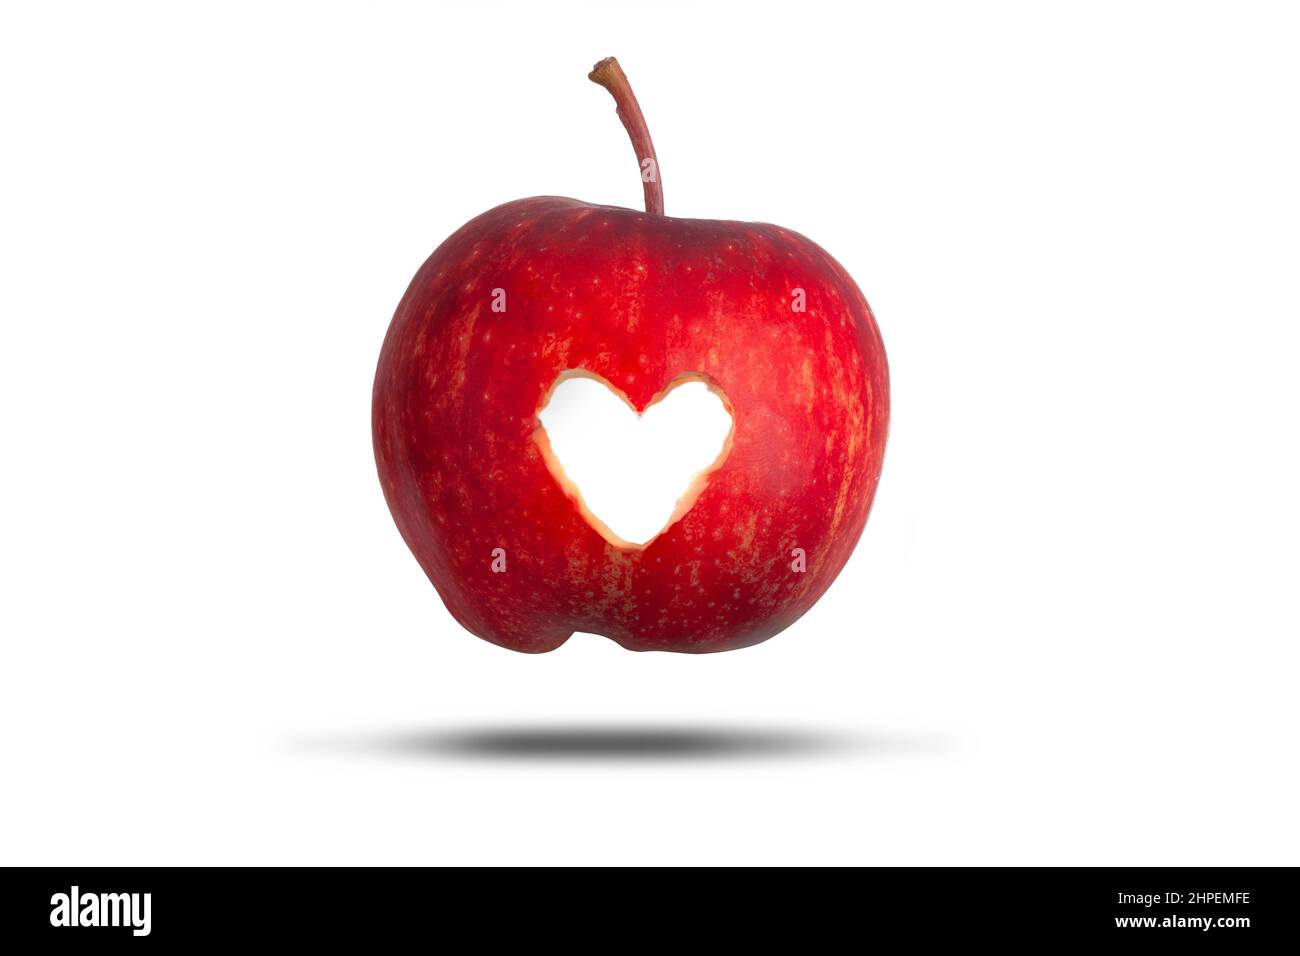 Love heart cut through a red apple isolated on a white background. Love fresh fruit concept Stock Photo